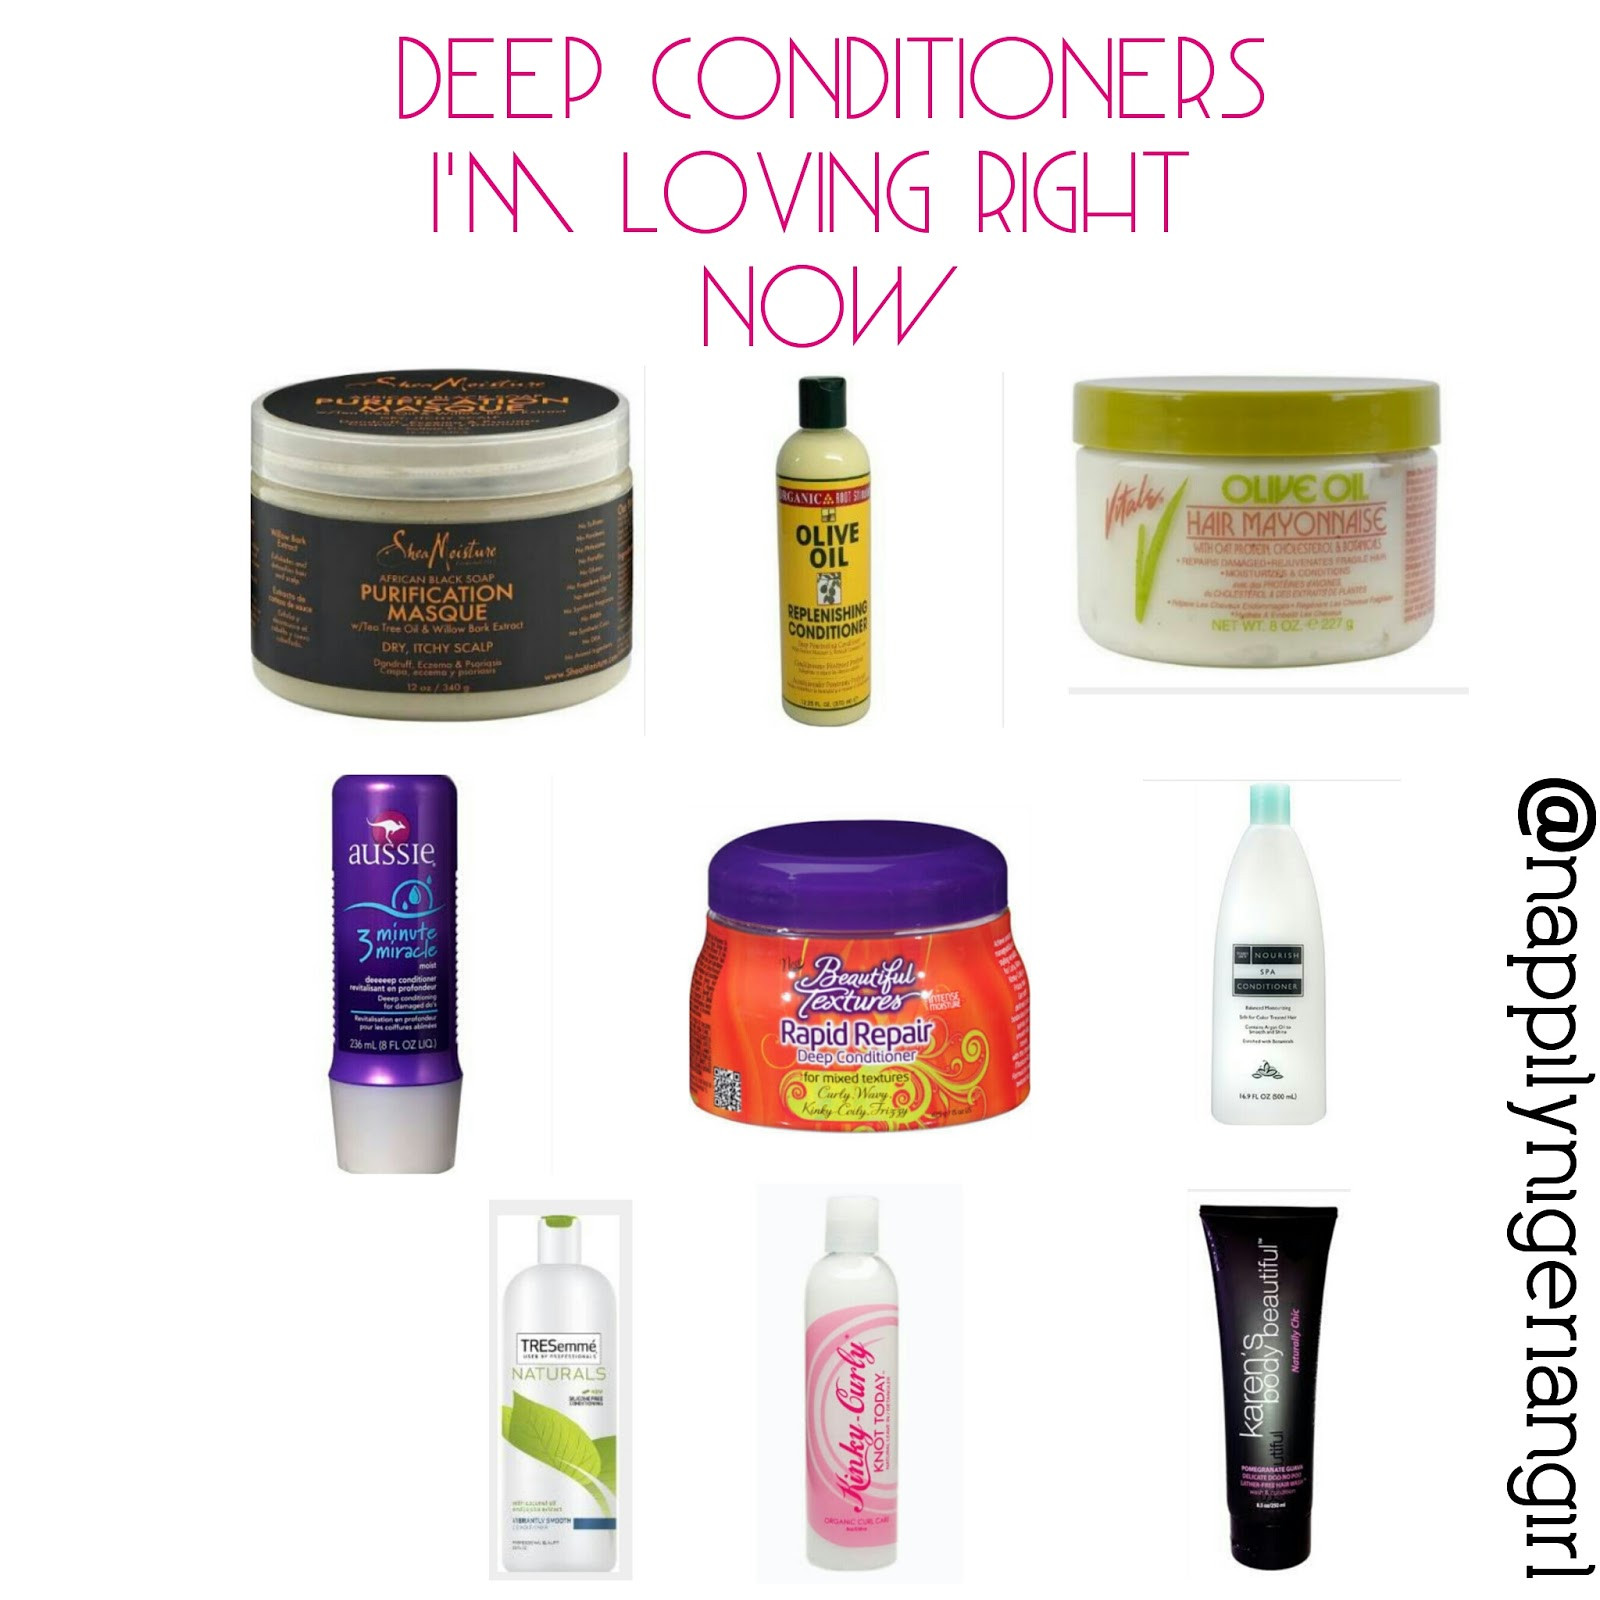 DIY Deep Conditioner For 4C Natural Hair
 TOP DEEP CONDITIONERS FOR NATURAL HAIR nappilynigeriangirl